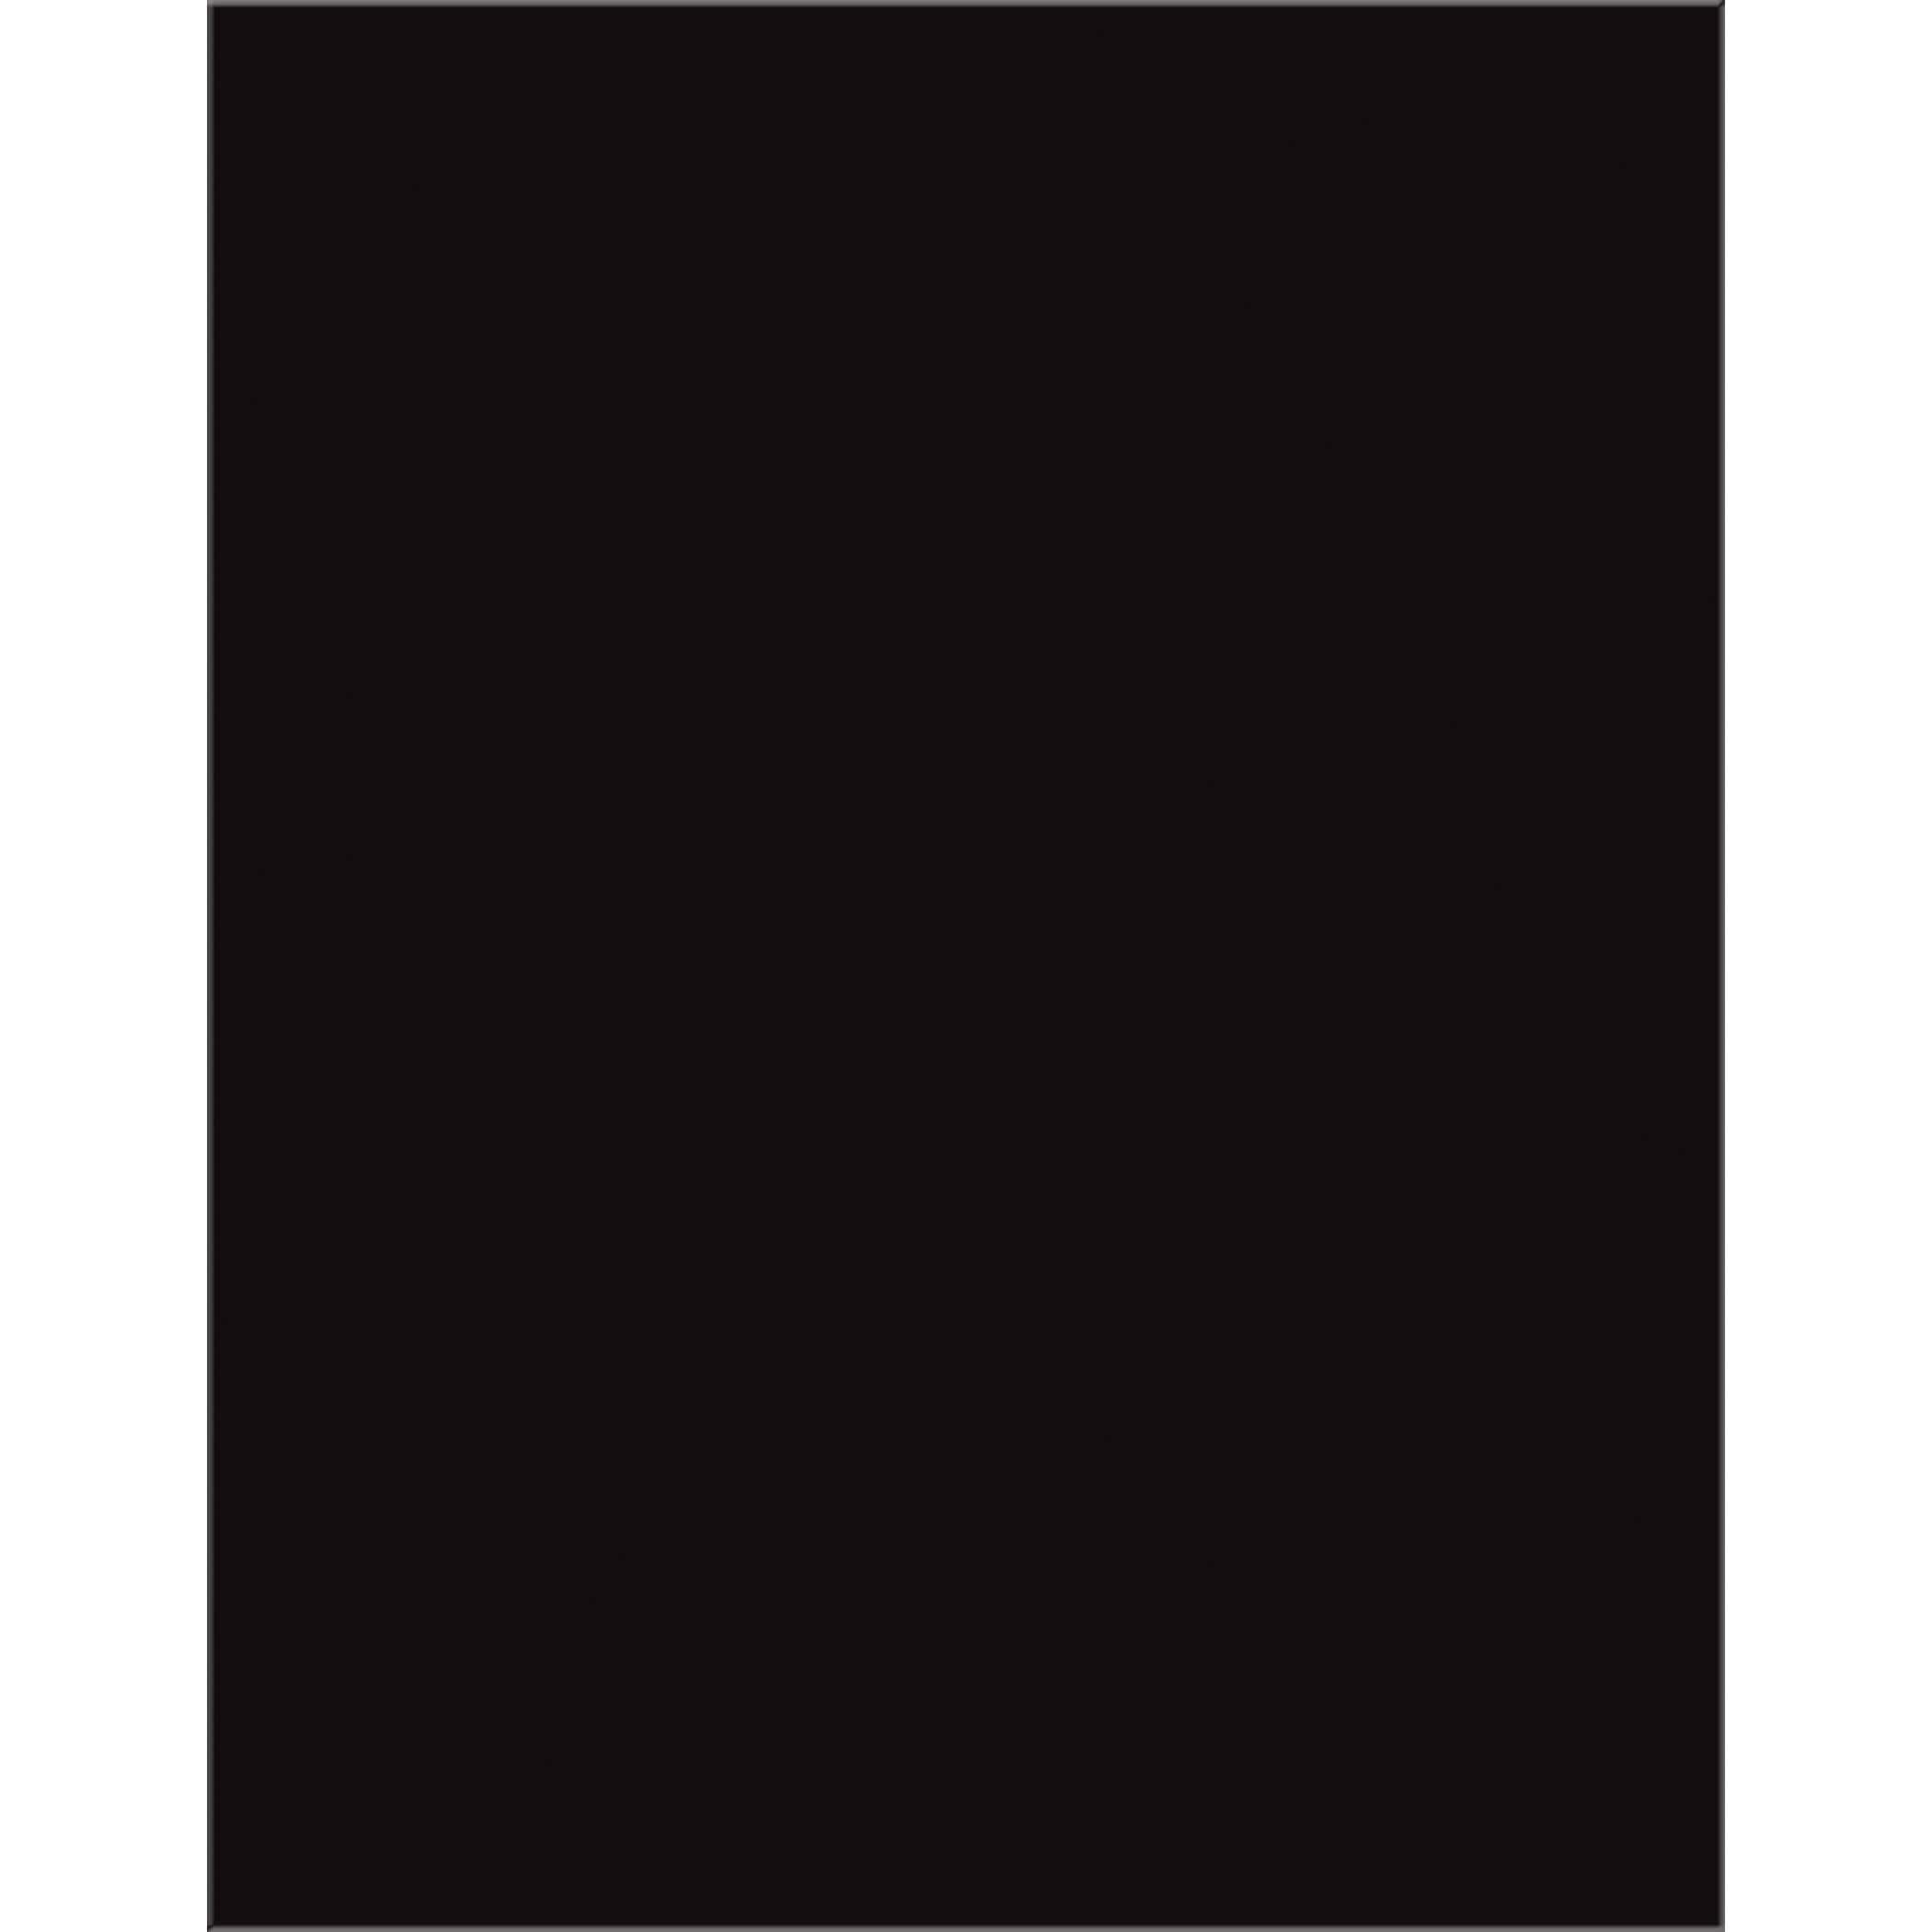 Pacon® Black Chalkboard Poster Board, 22 x 28, Pack of 25 Sheets